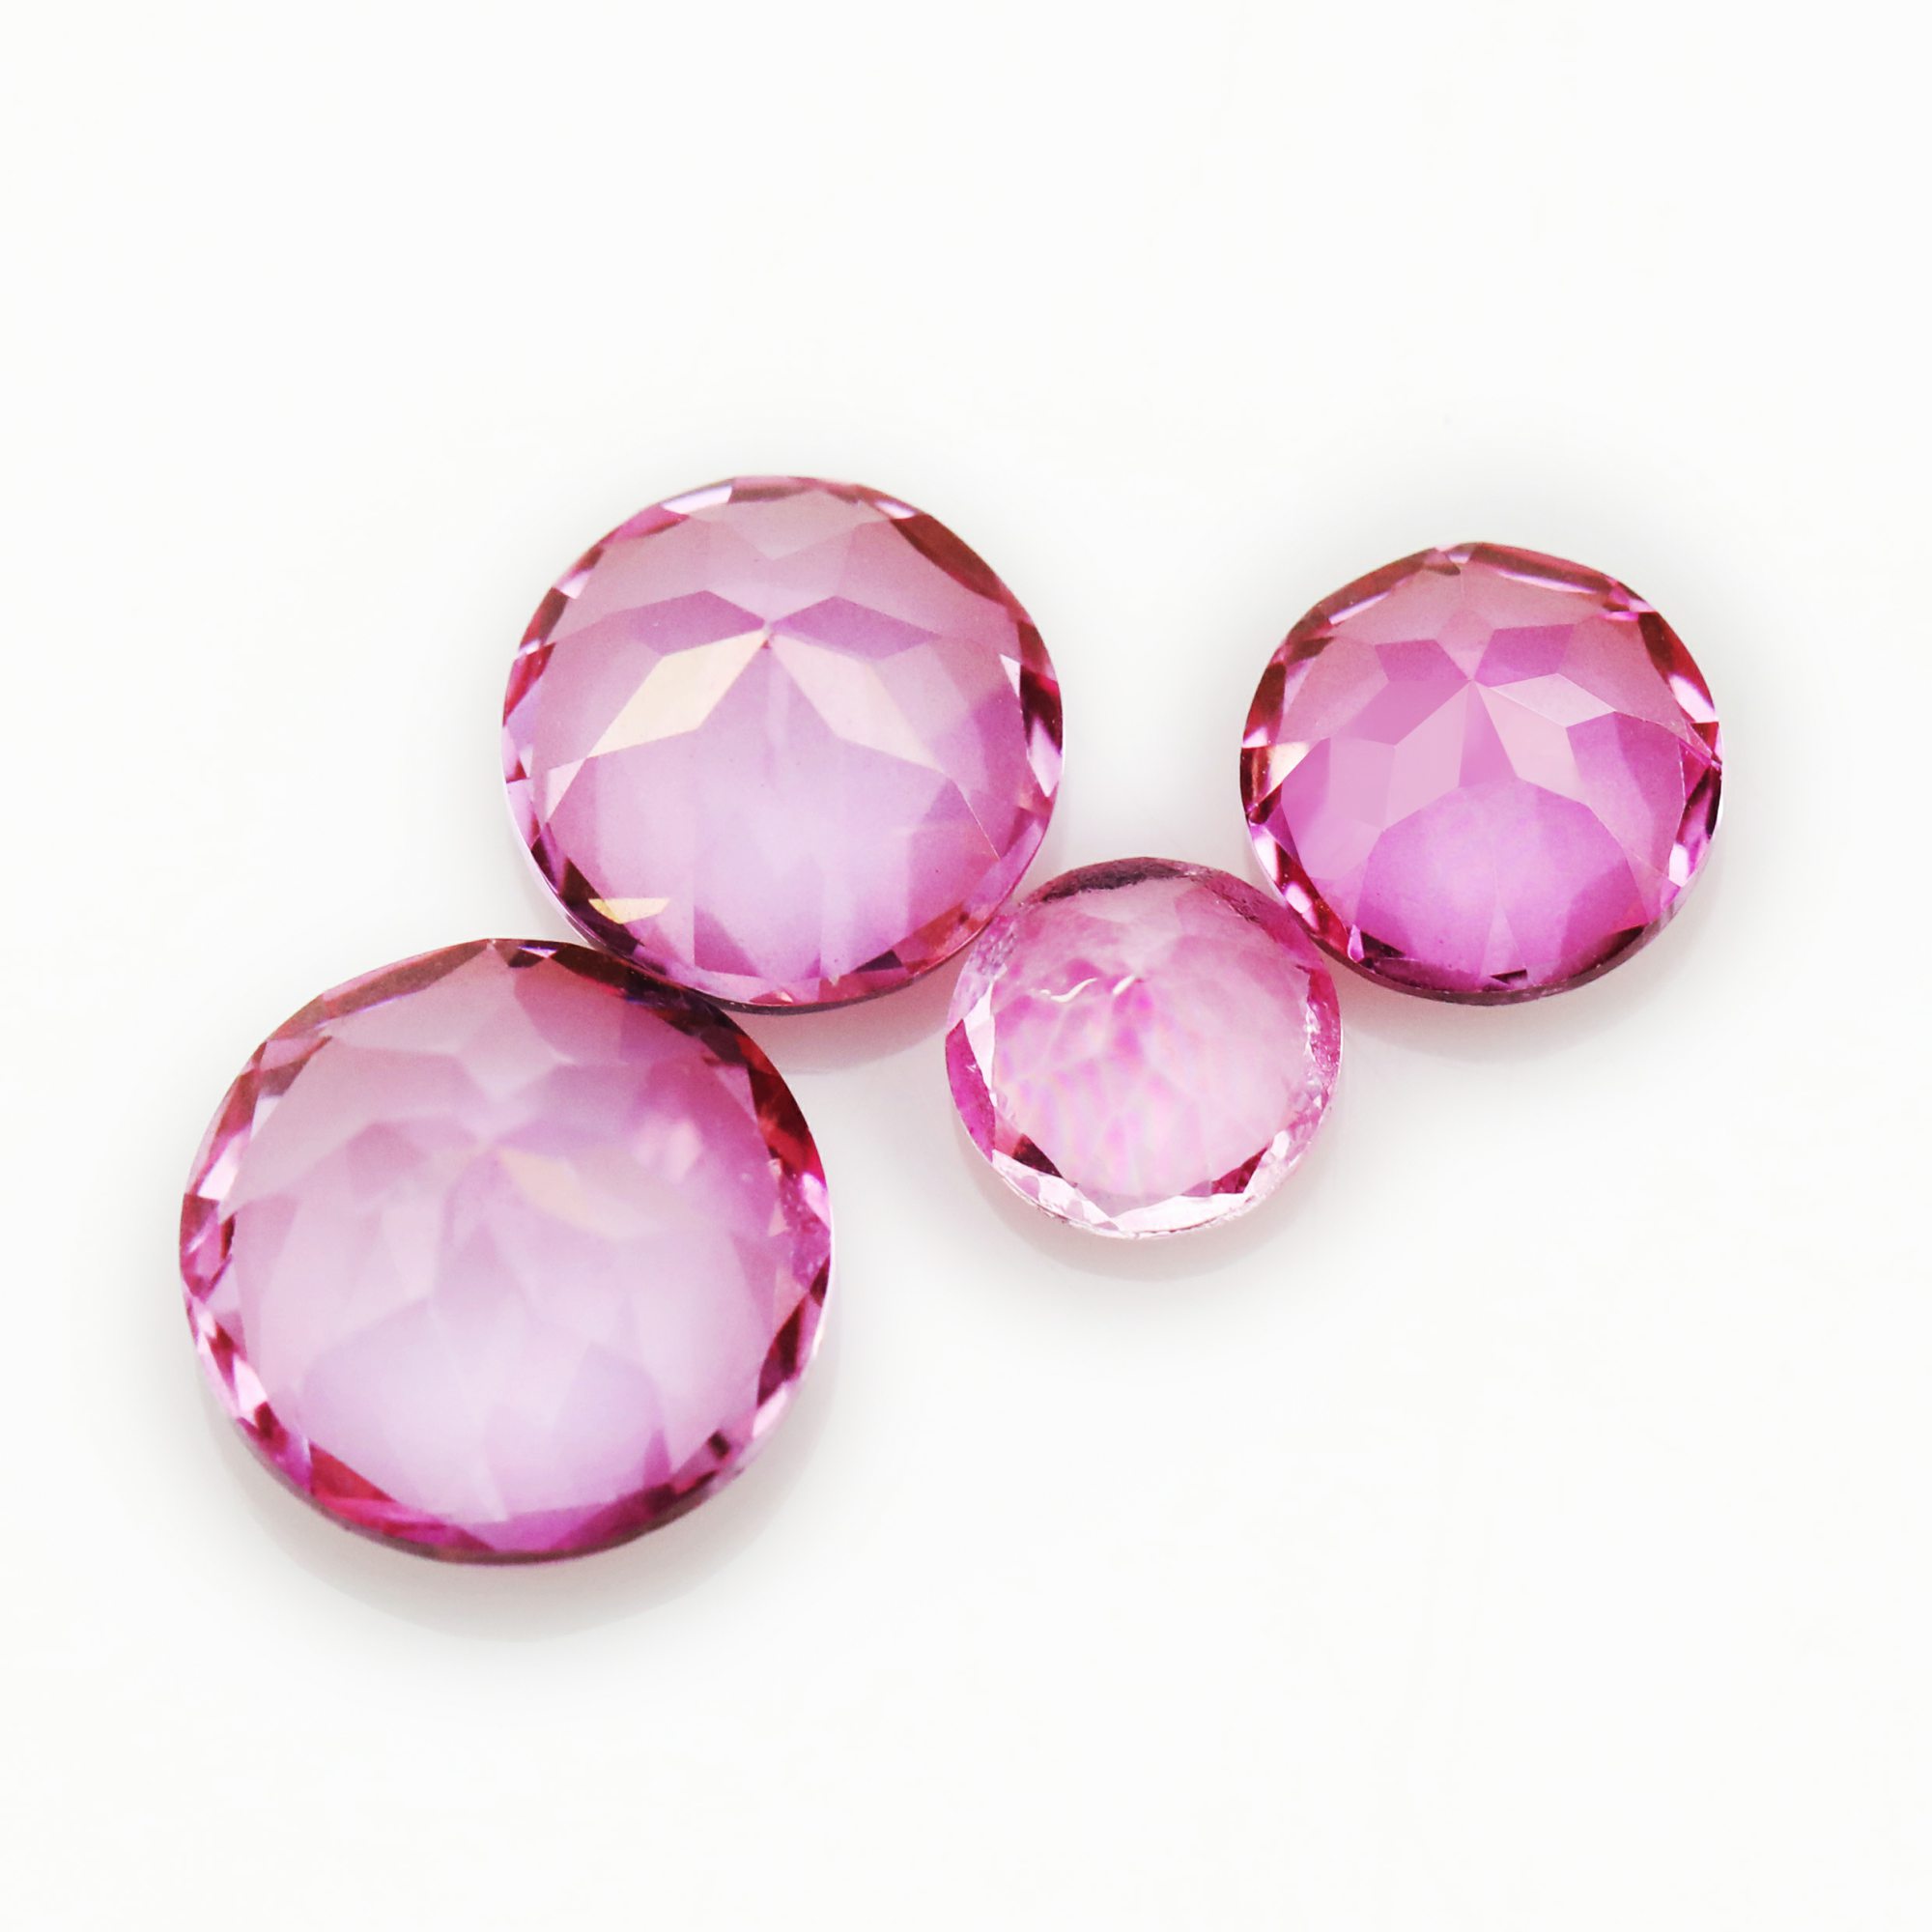 1Pcs Faceted Round Hot Pink Topaz Nature Point Back Gemstone November Birthstone DIY Loose Stone Supplies 4110181 - Click Image to Close